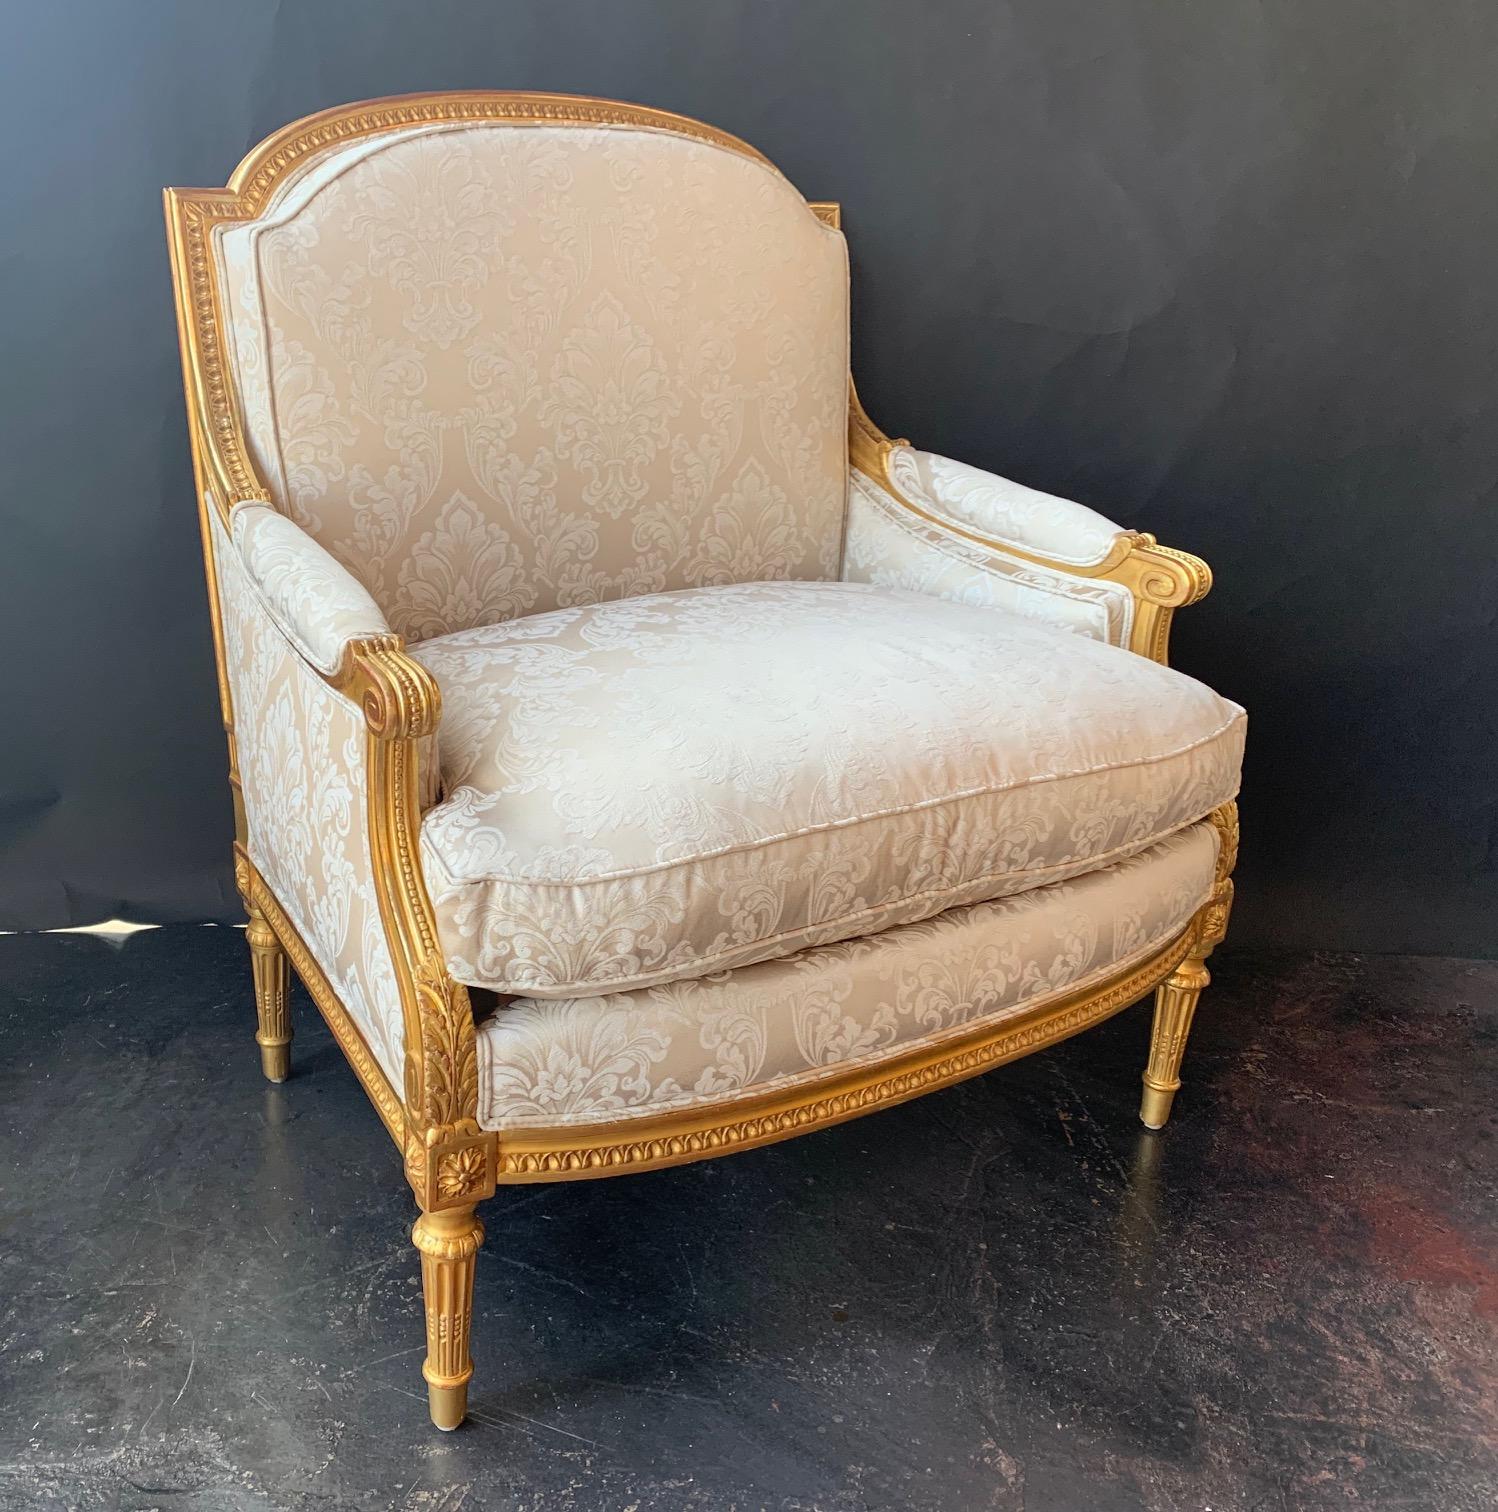 19th century pair of Marquis Louis XVI Chairs, France.